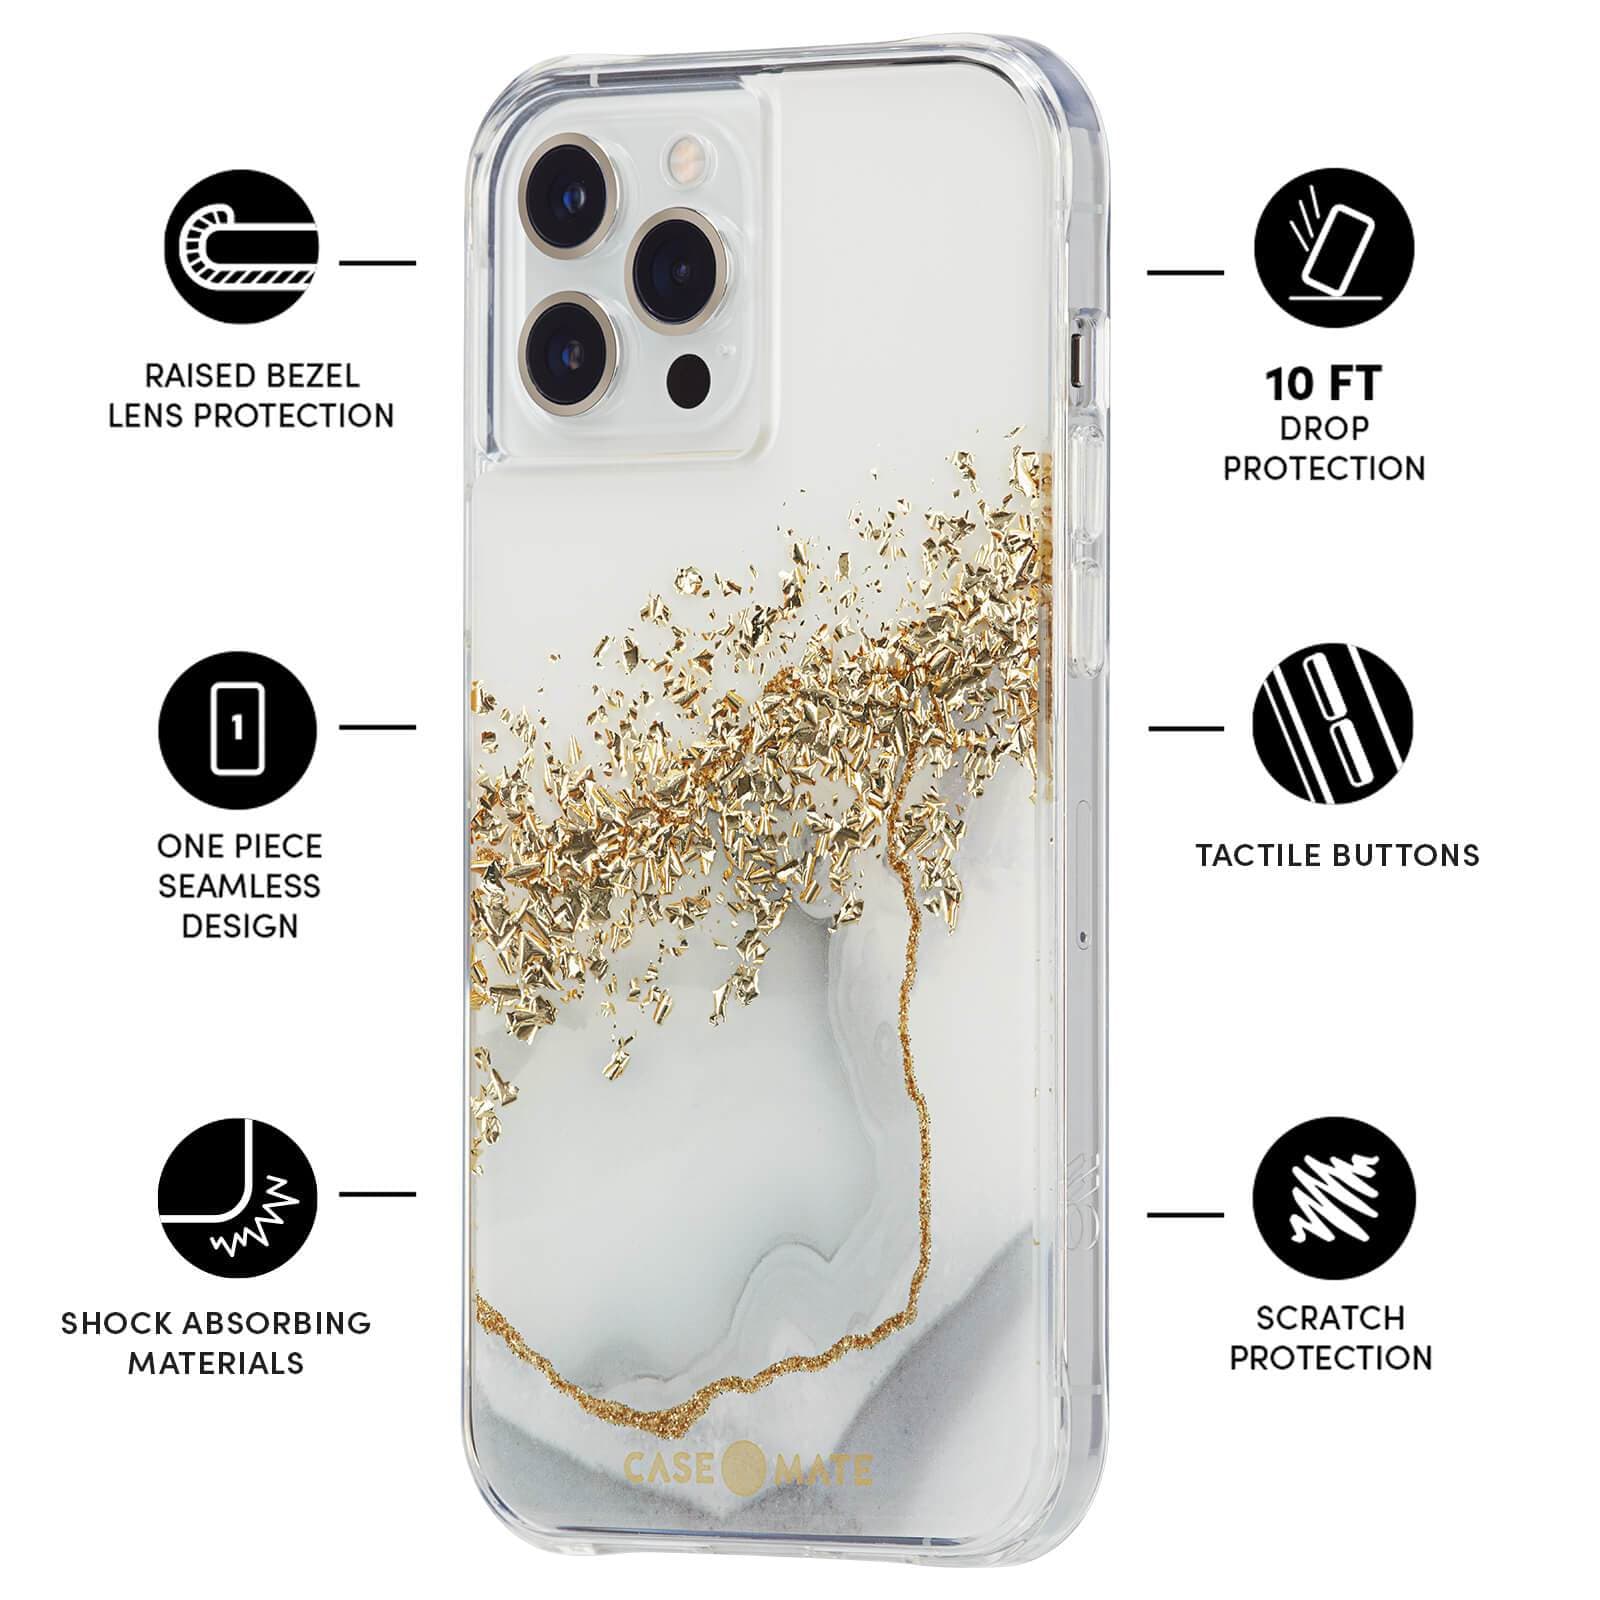 Features Raised Bezel Lens Protection, One Piece Seamless Design, Shock Absorbing Materials, 10 ft Drop Protection, Tactile Buttons, Scratch Protection. color::Karat Marble